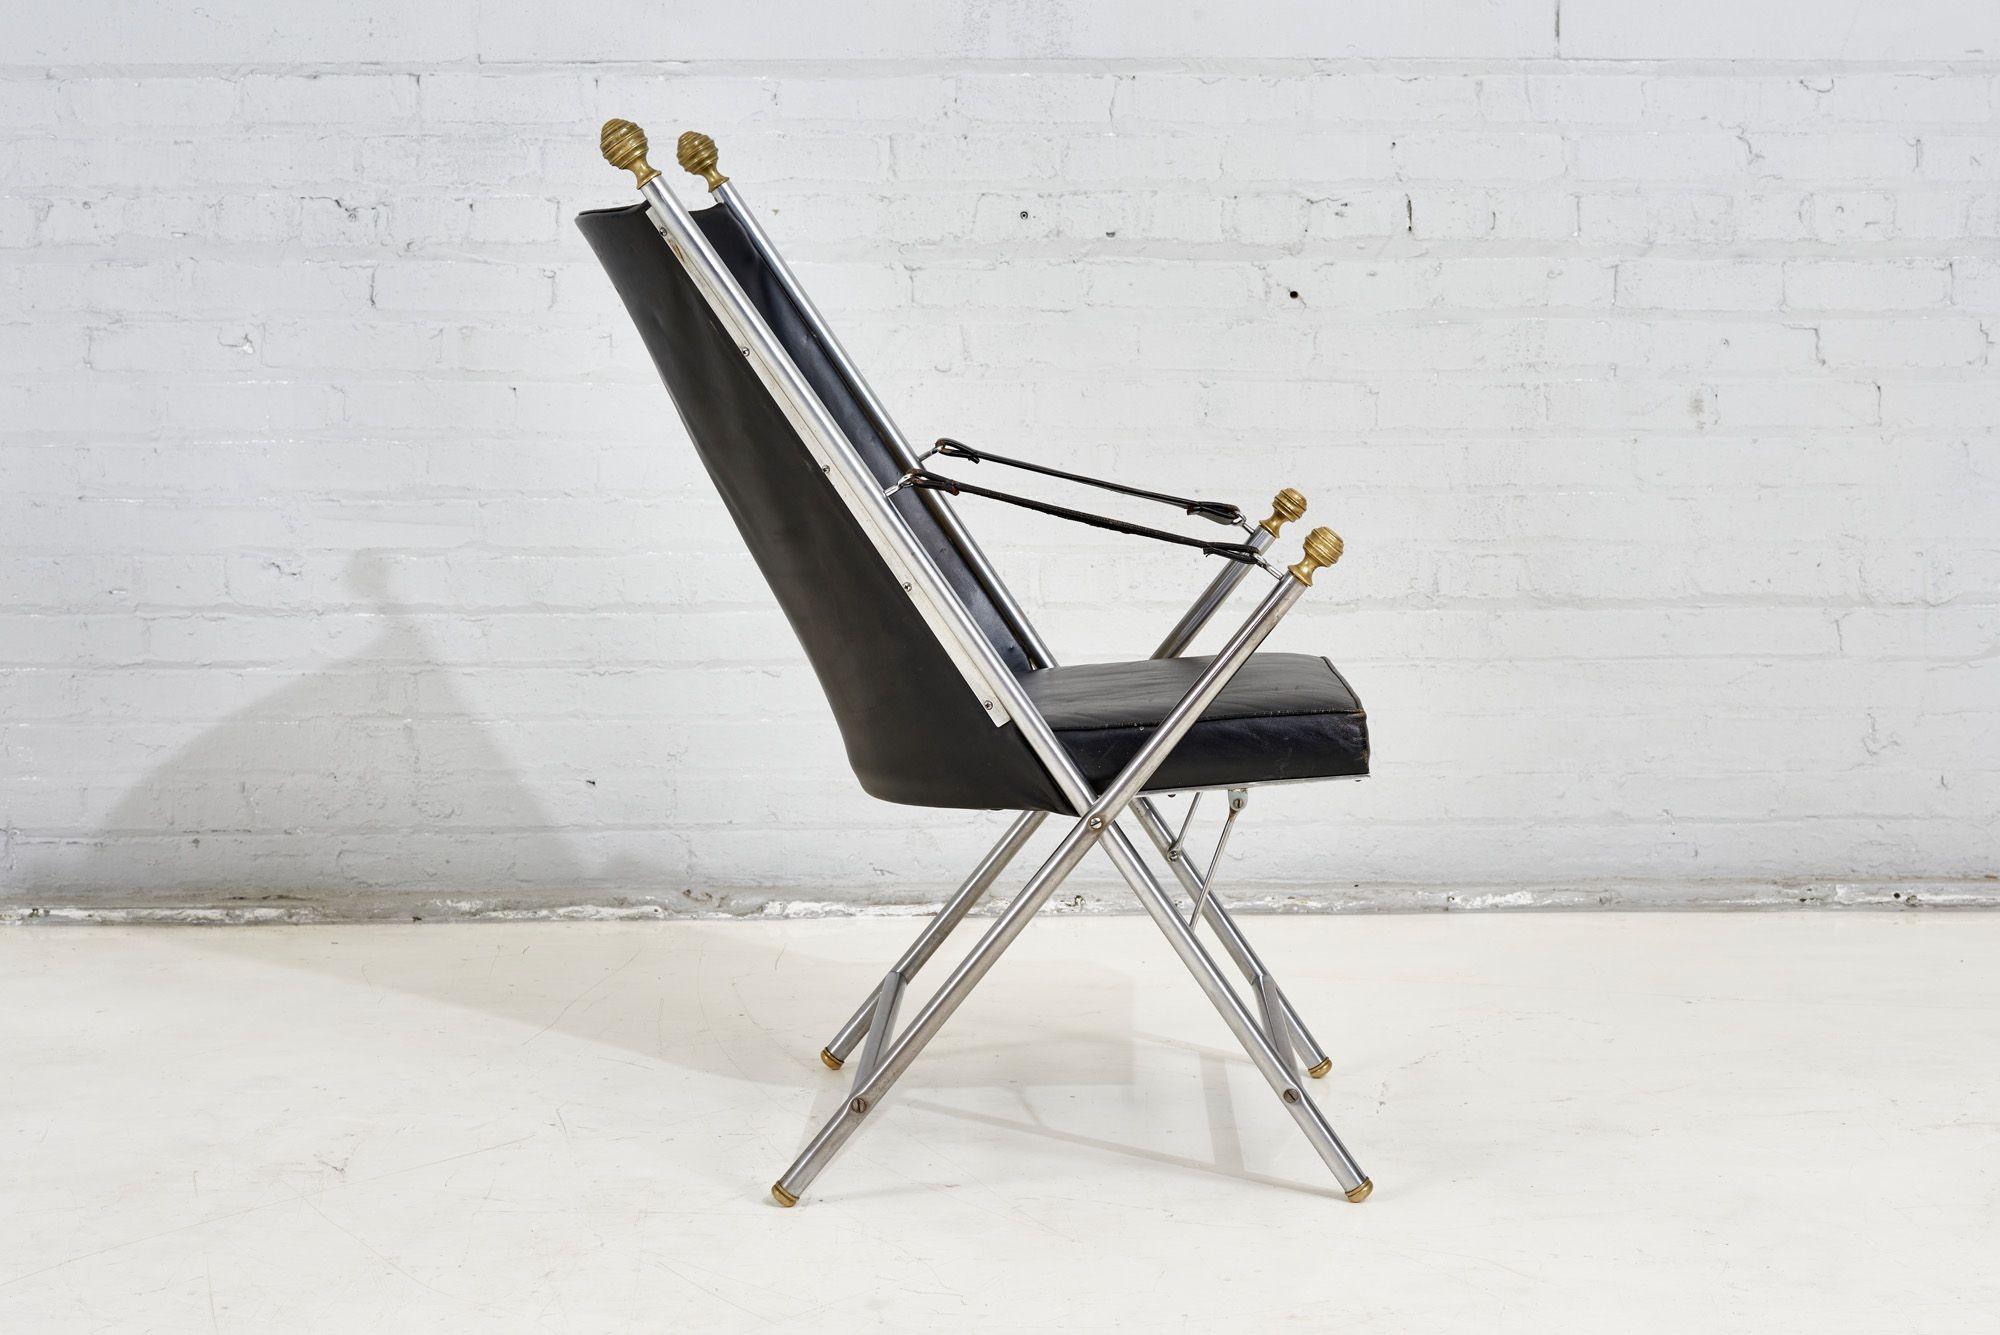 Pair Leather Campaign Folding Chairs by Maison Jansen, 1960 For Sale 4